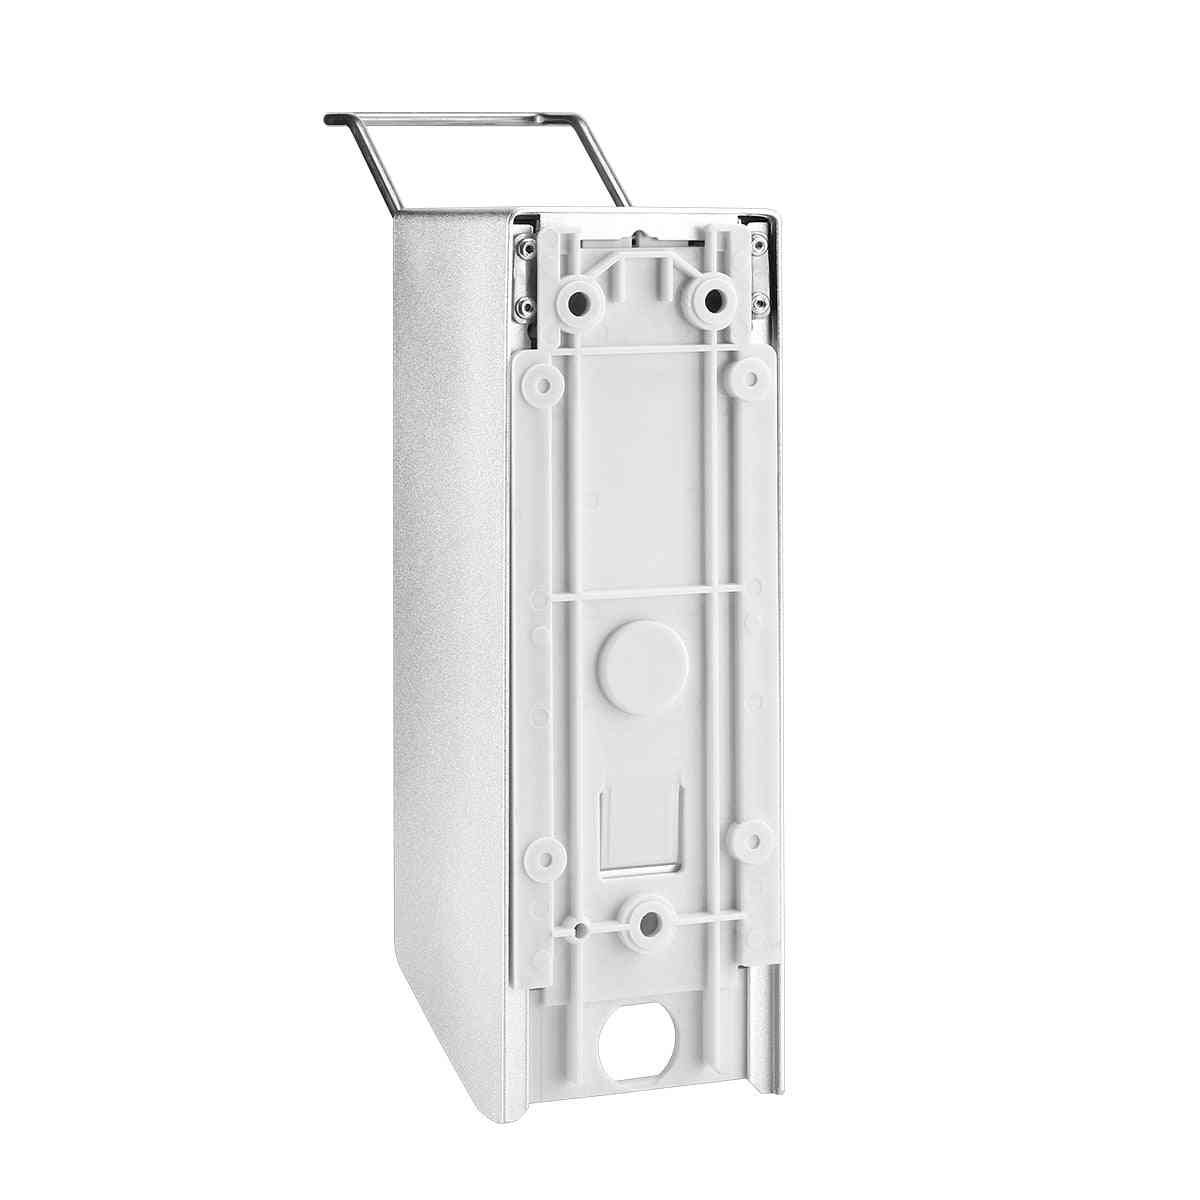 Wall Mount Soap, Sanitizer, Lotion Dispenser With Manual Pump For Bathrooms And Hospitals